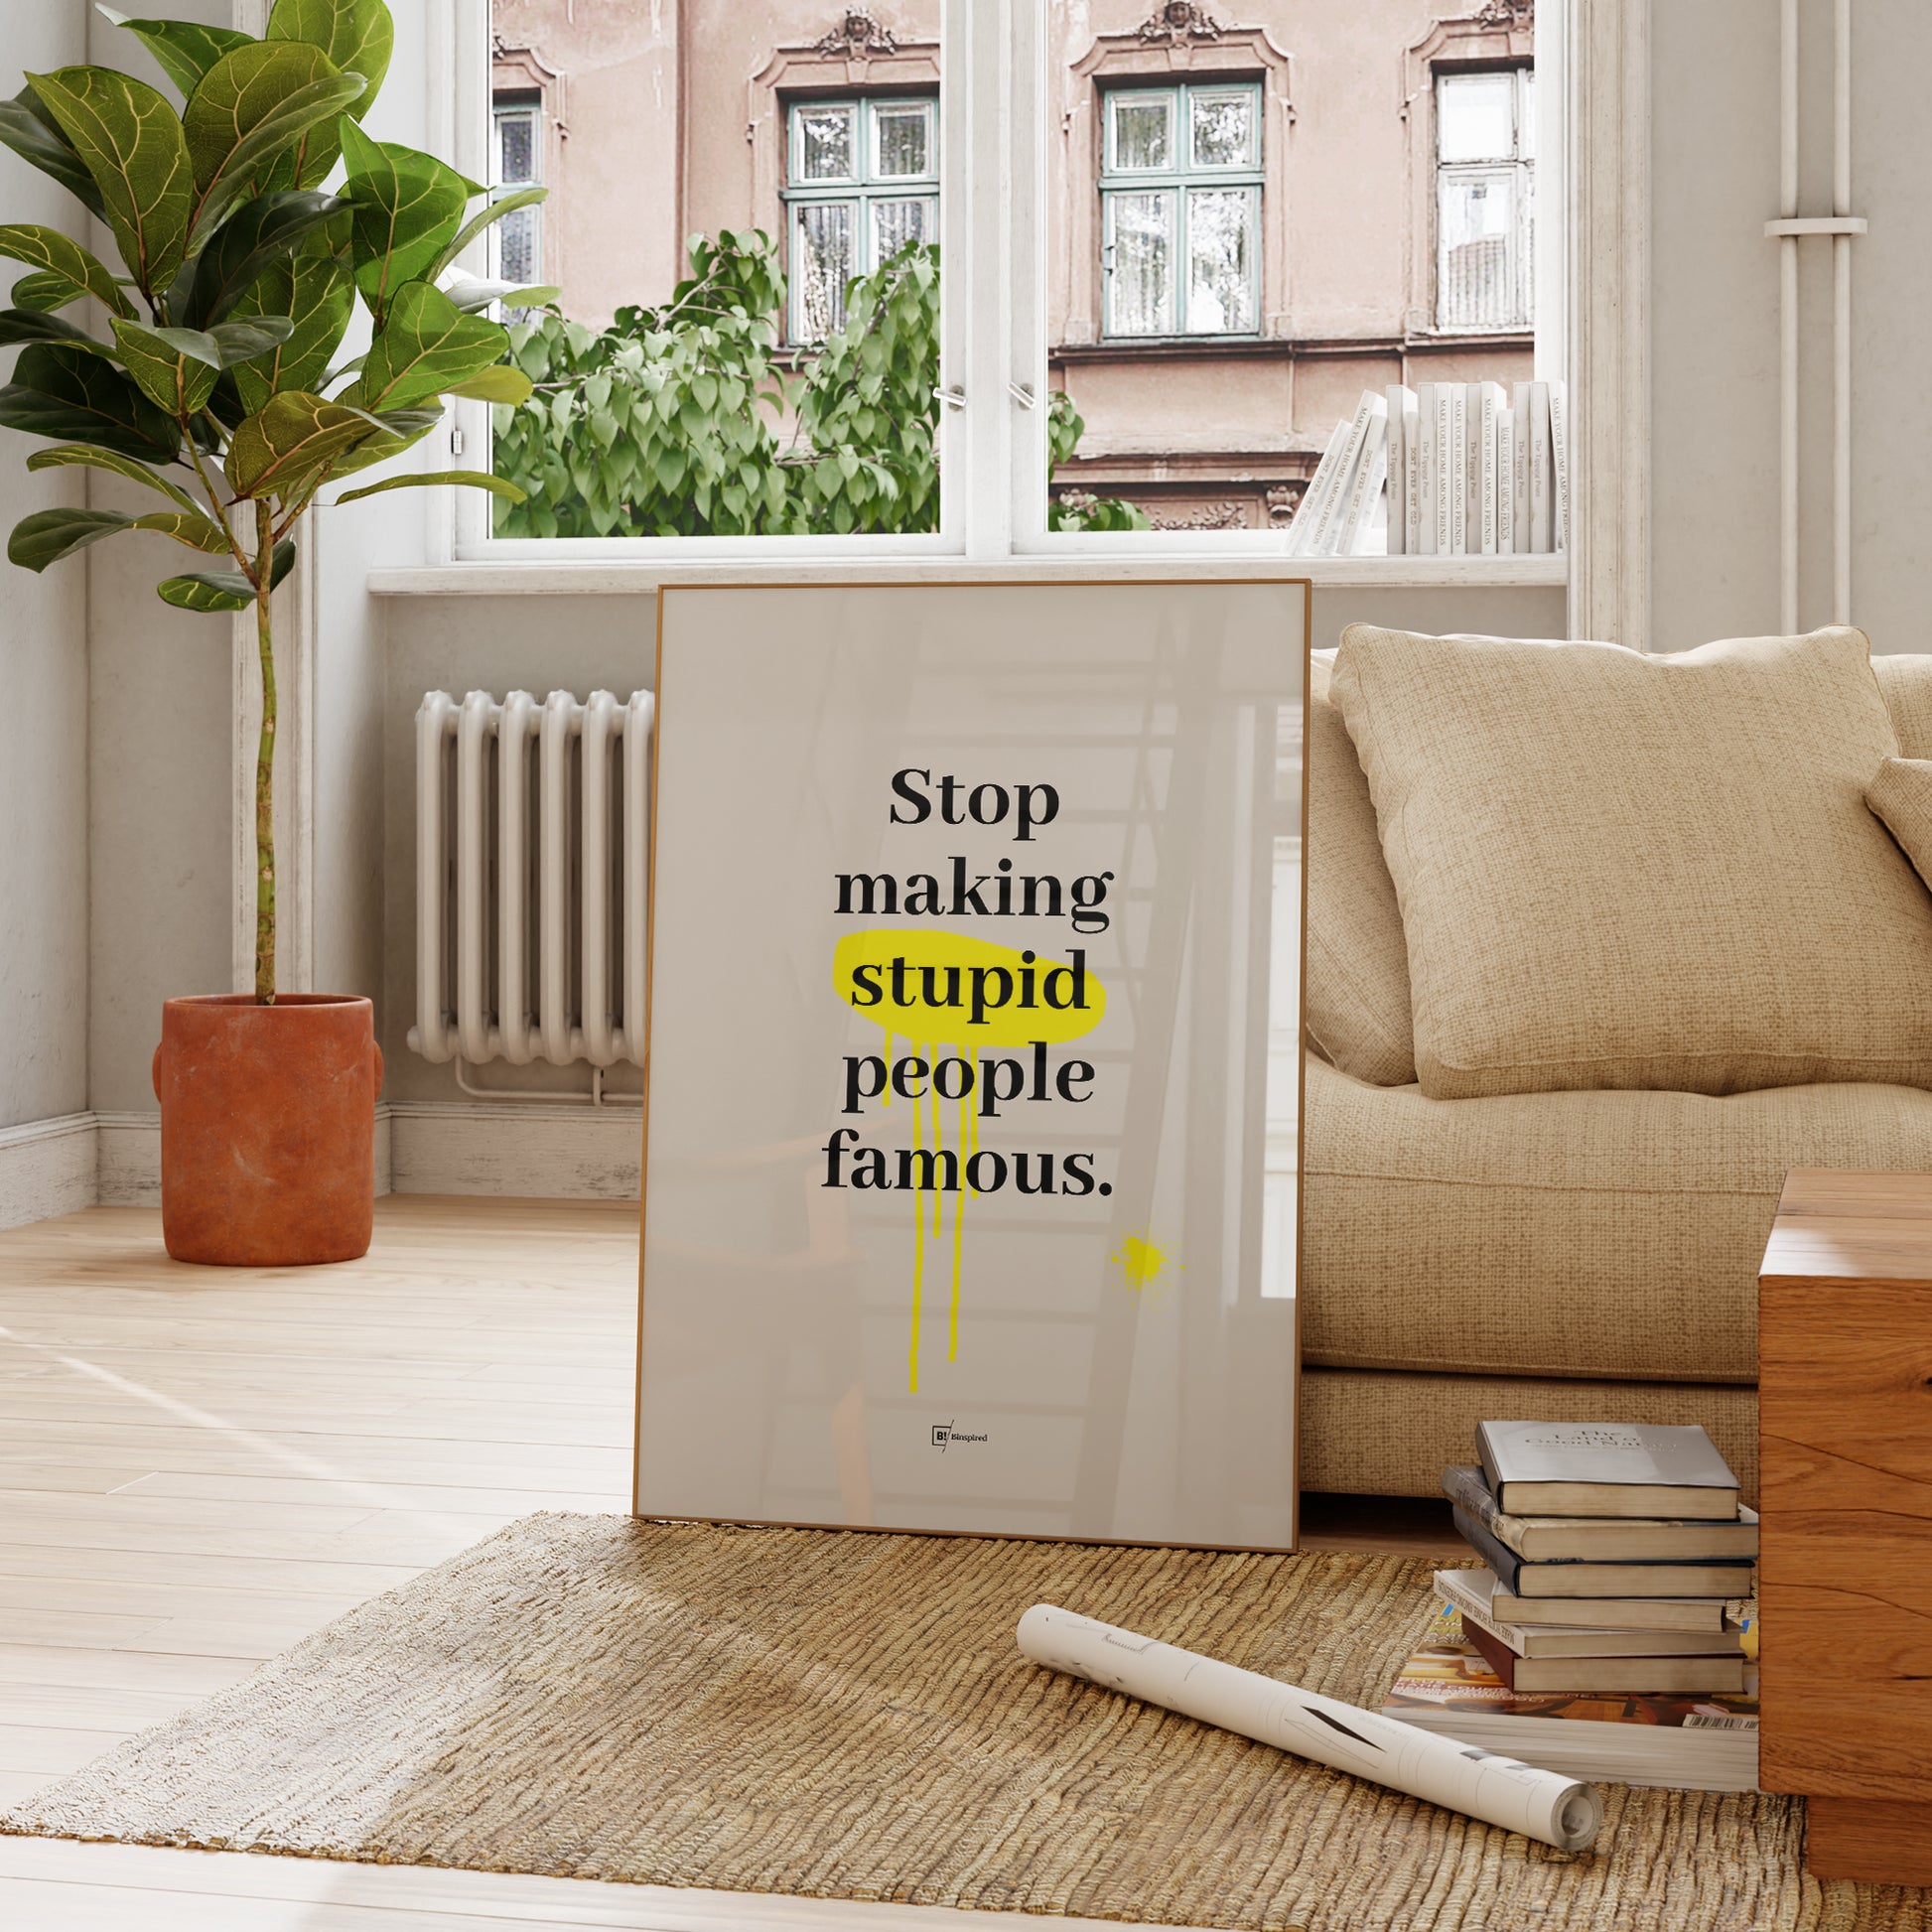 Be inspired by our "Stop making stupid people famous" quote art print! This artwork was printed using the giclée process on archival acid-free paper and is presented in a french living room that captures its timeless beauty in every detail.